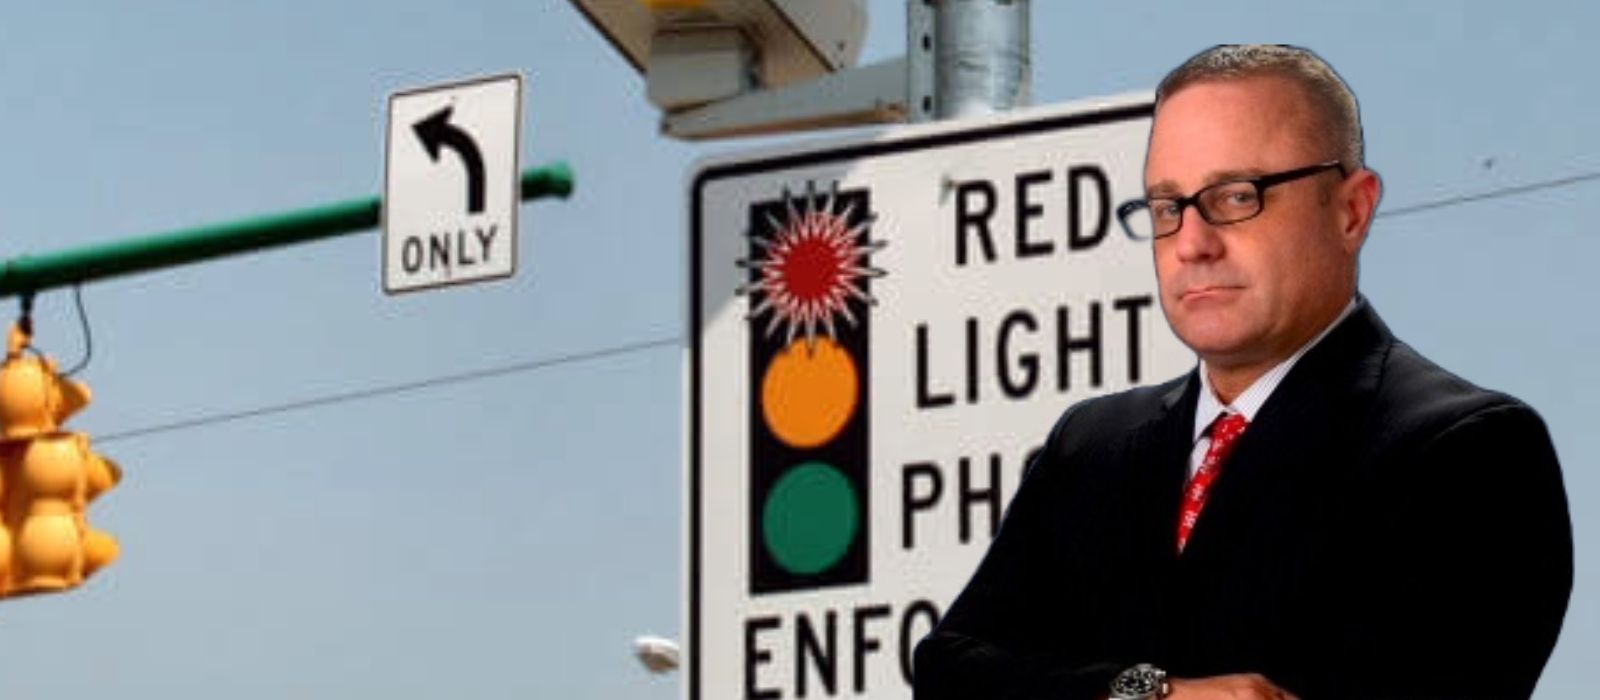 Are Red Light and Speed Cameras Unconstitutional or Not?